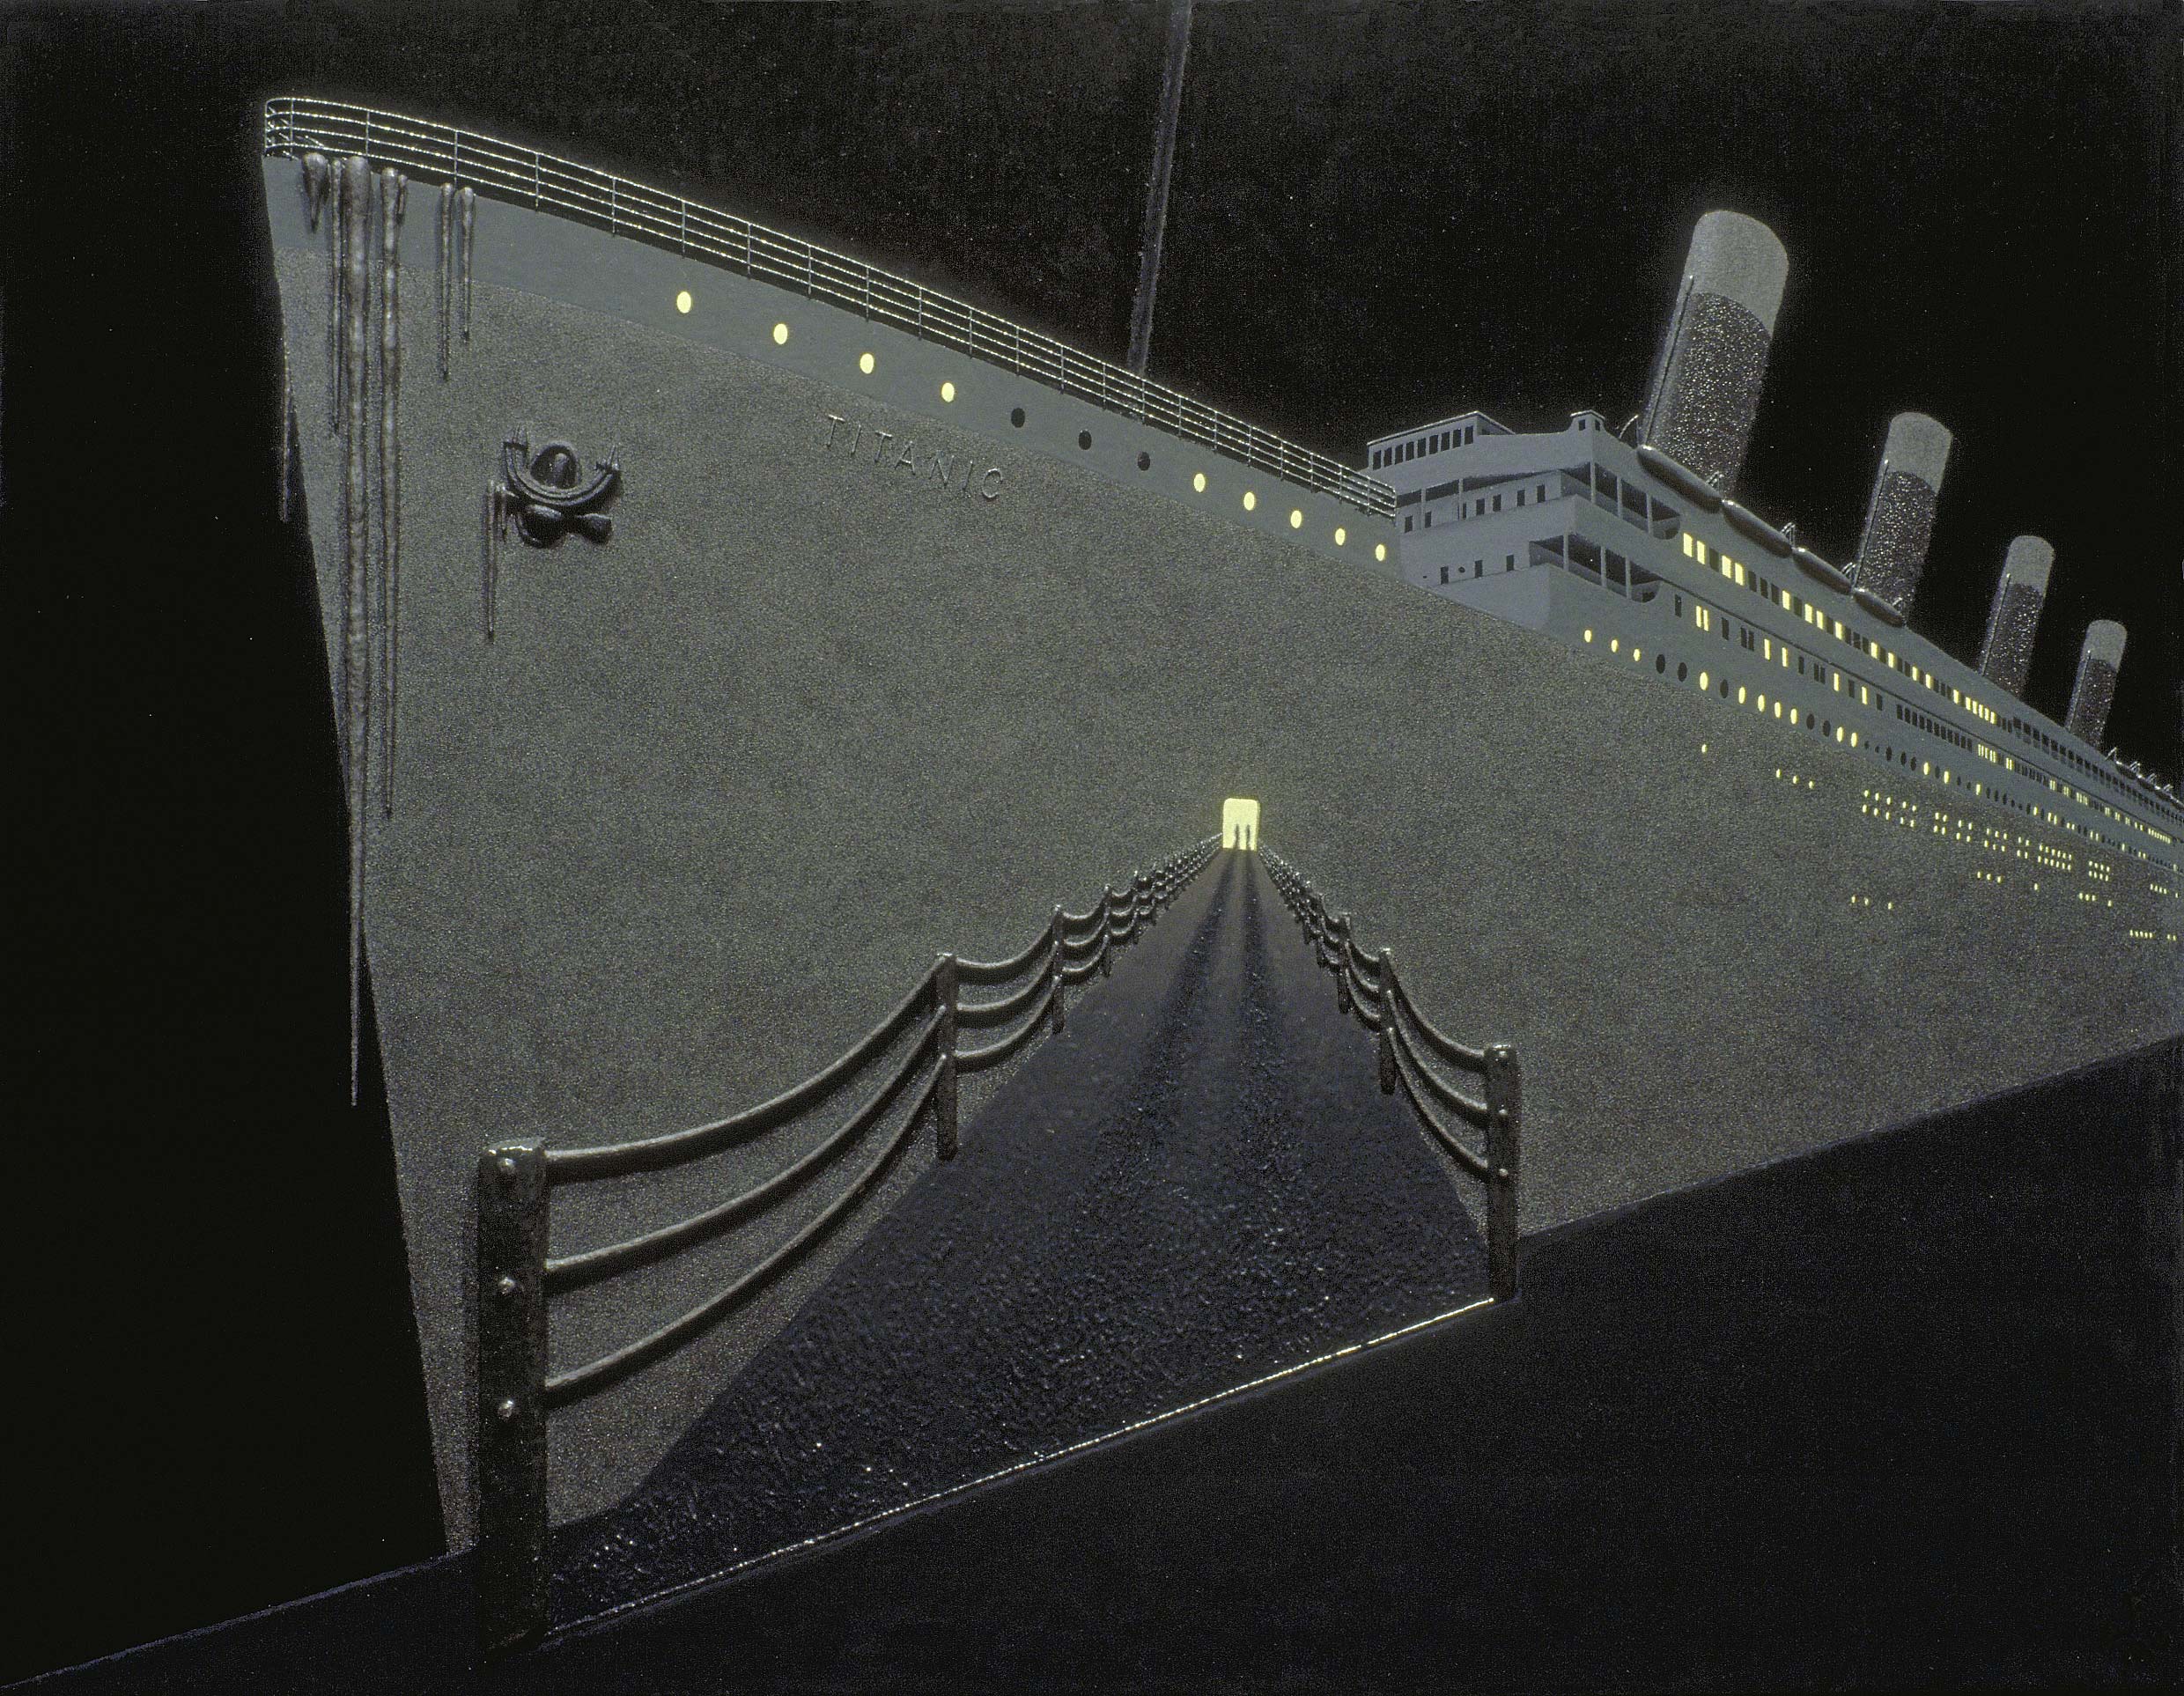 View of the Titanic as viewed from in front of a gangway, a man and woman silhouetted in the lighted entrance and rusticles already suspended from the prow